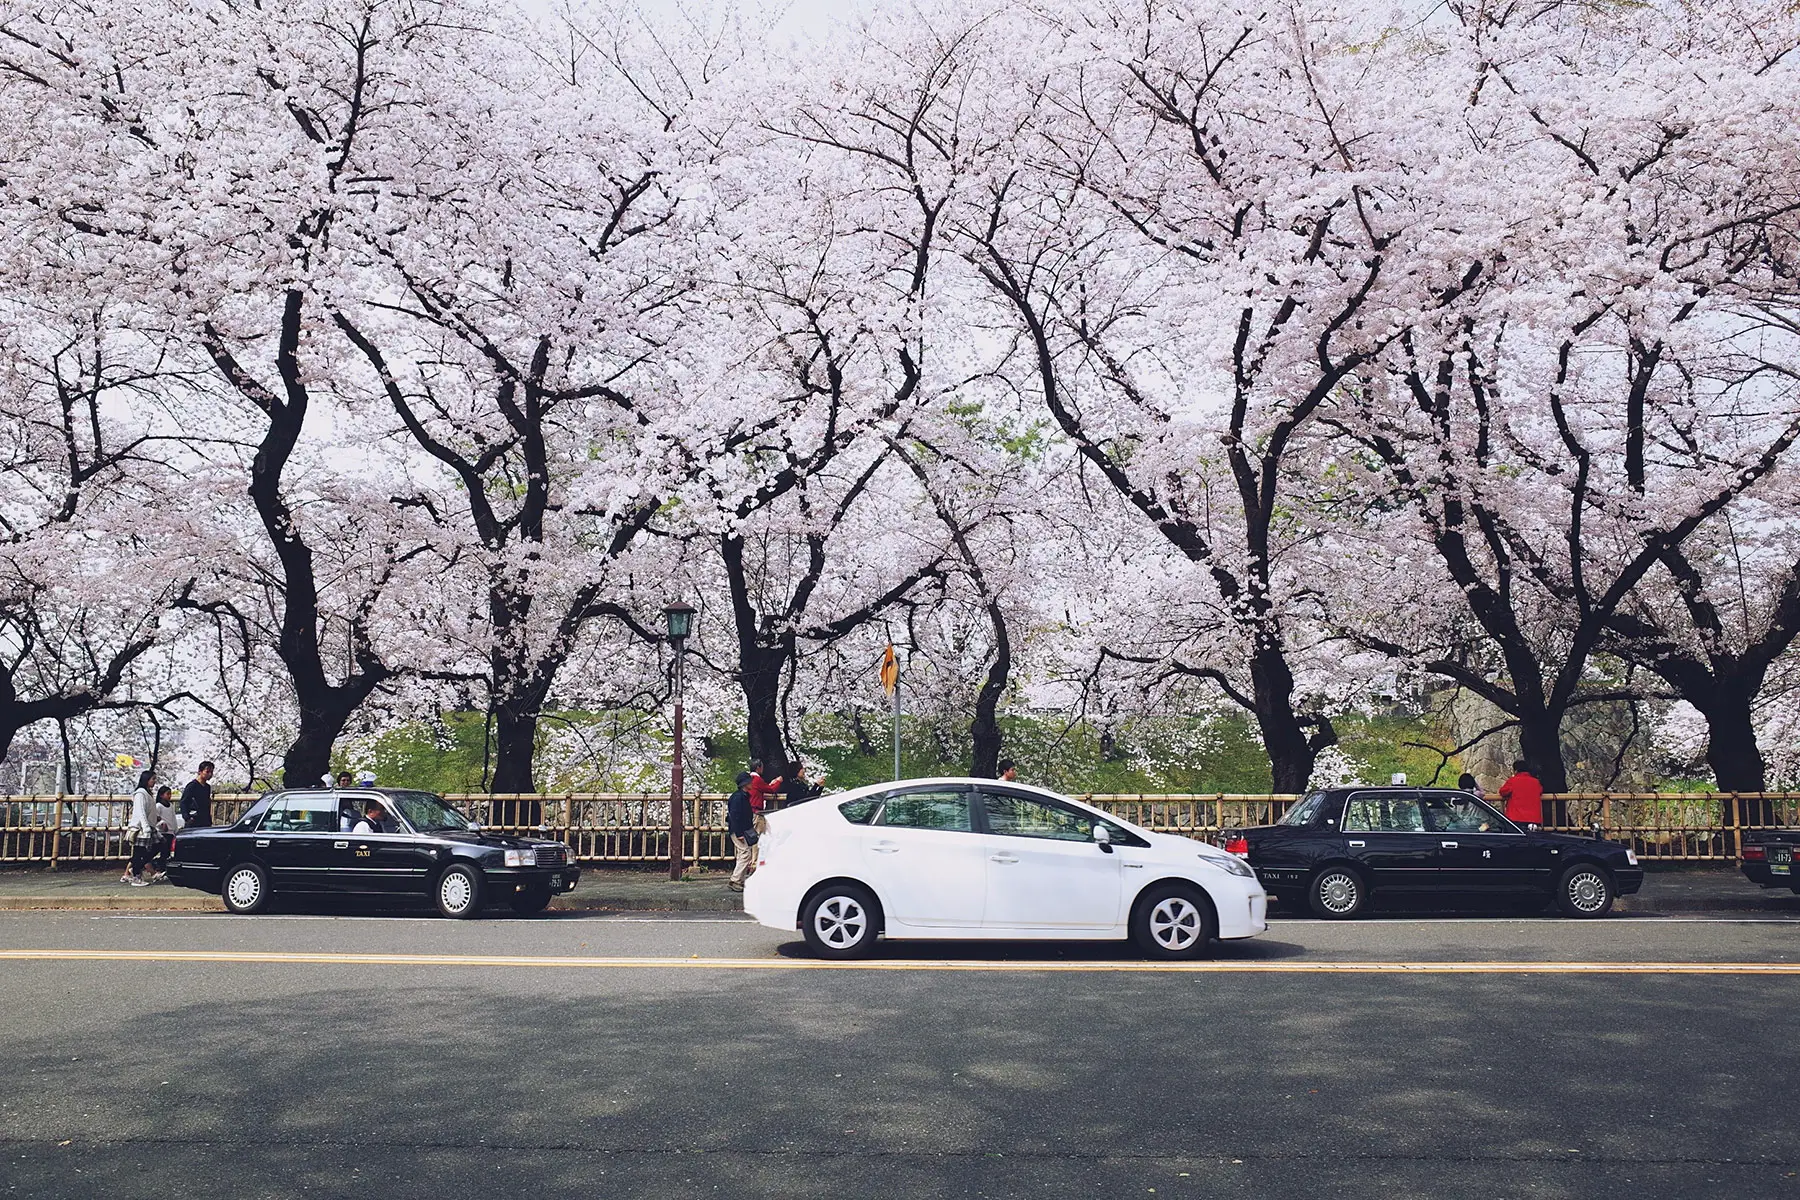 A white car and two black cars driving in front of blossoming trees